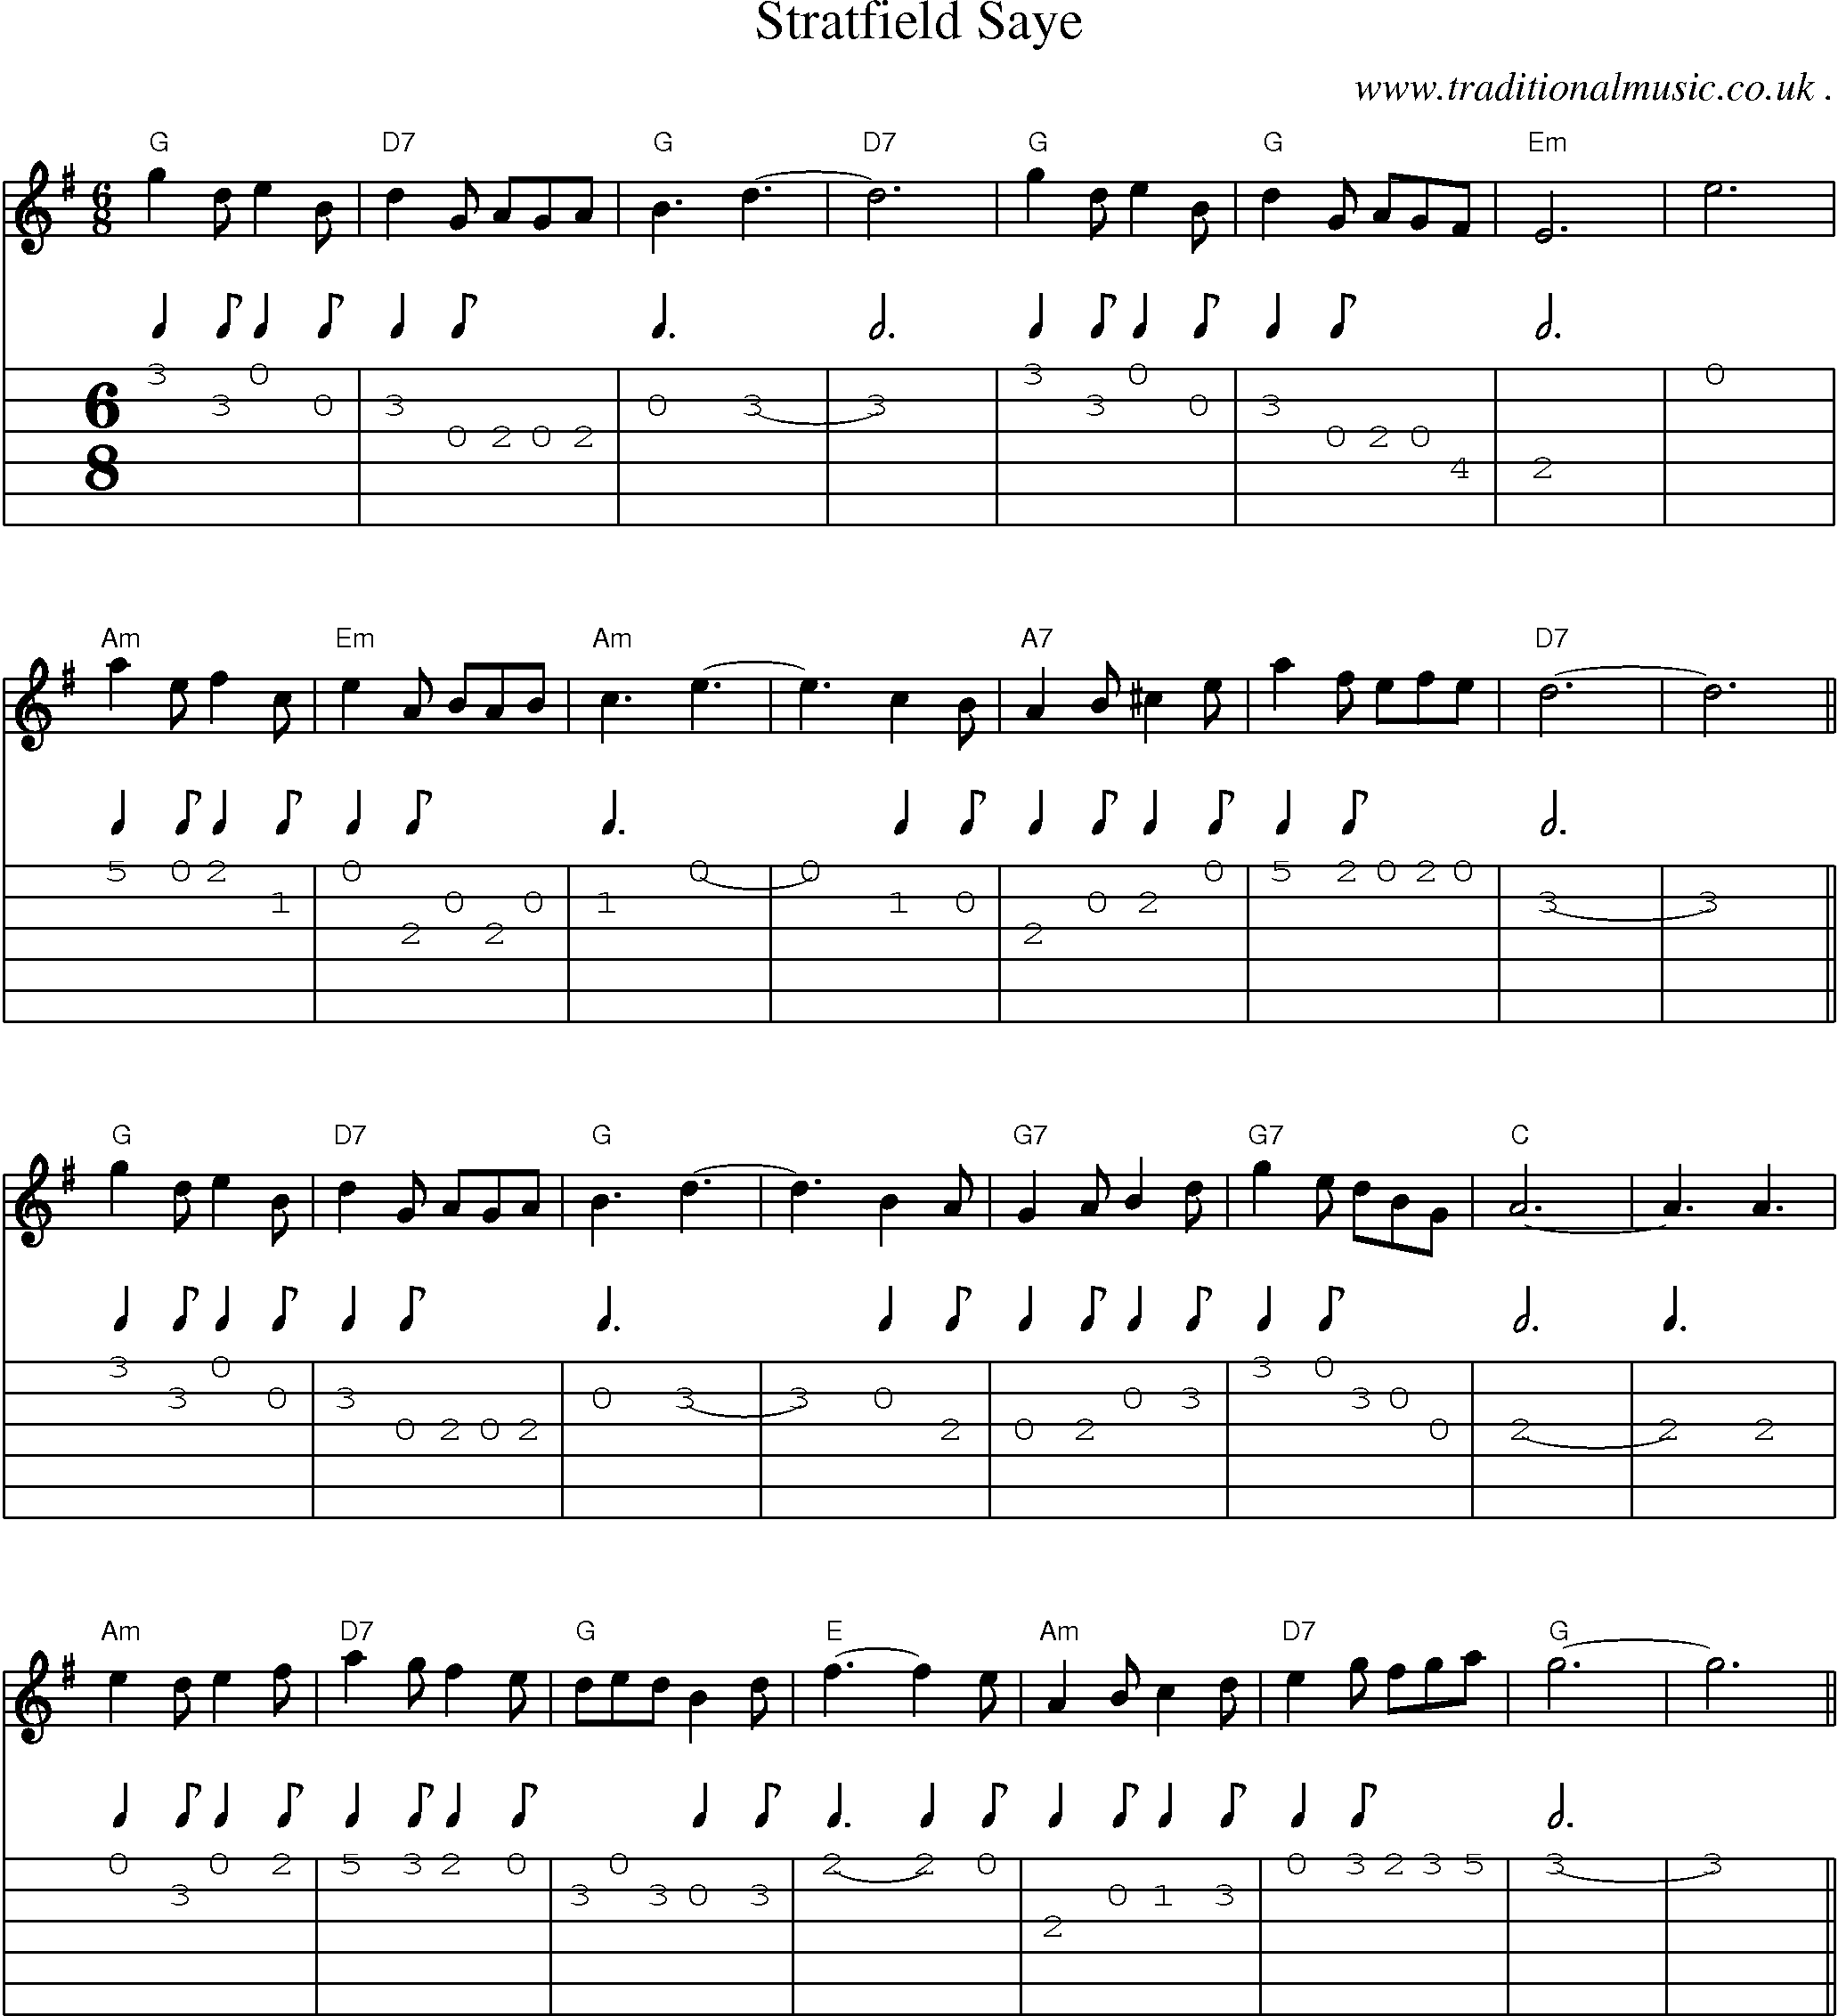 Sheet-Music and Guitar Tabs for Stratfield Saye